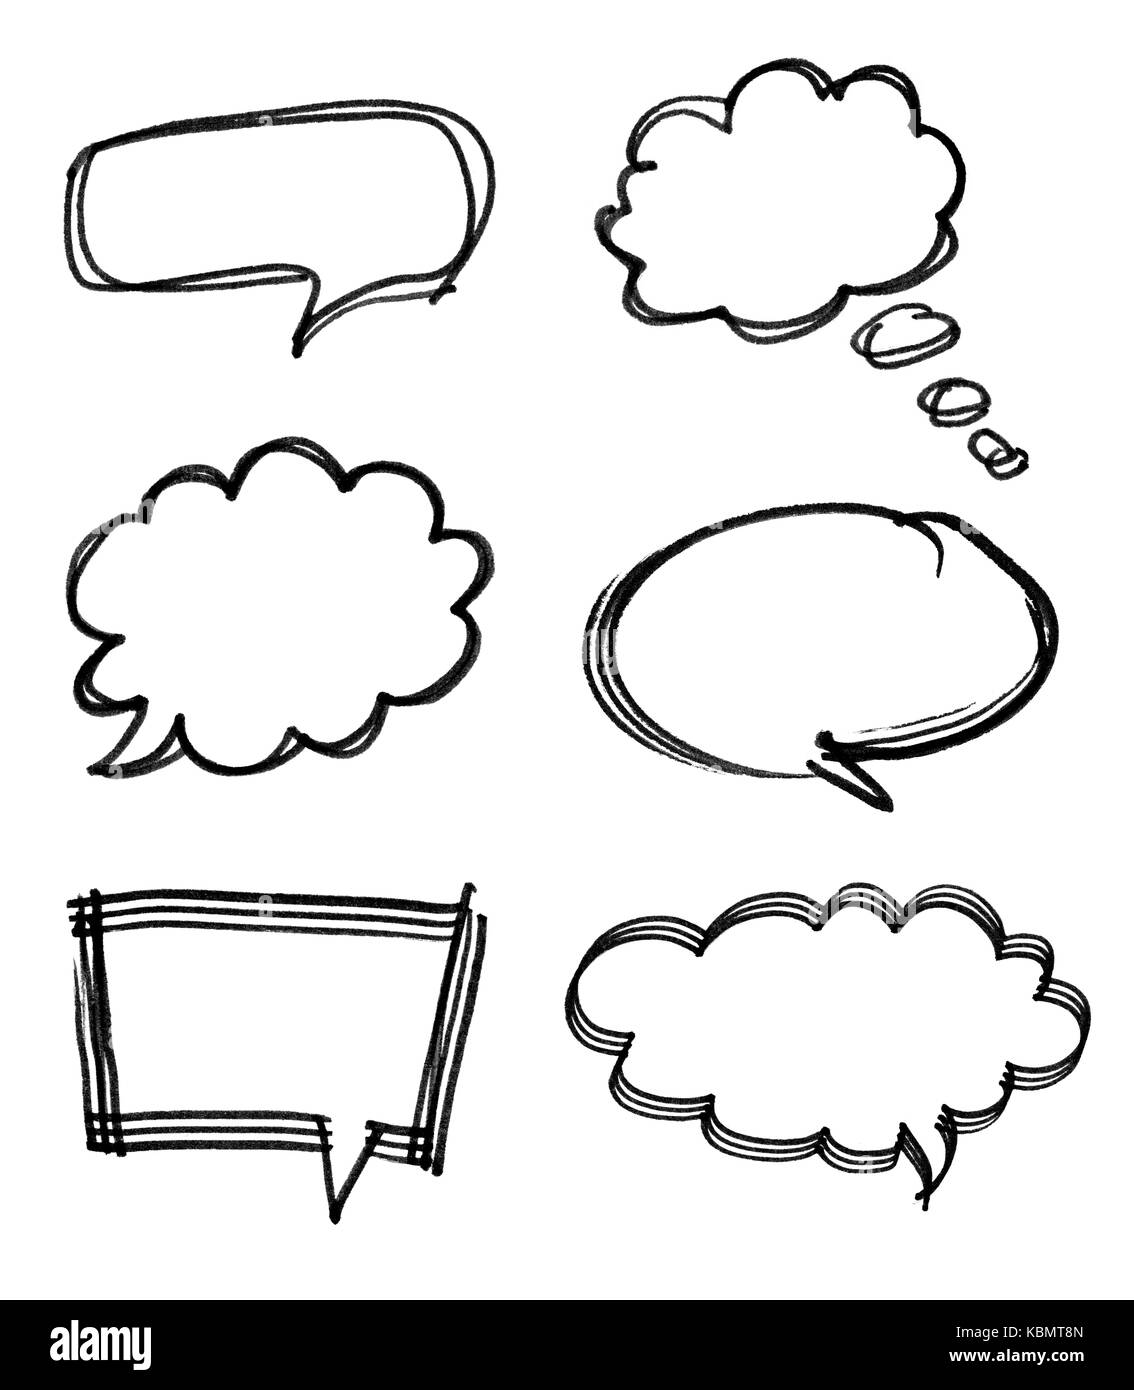 Speech bubble with brush stroke isolated on white background Stock Photo